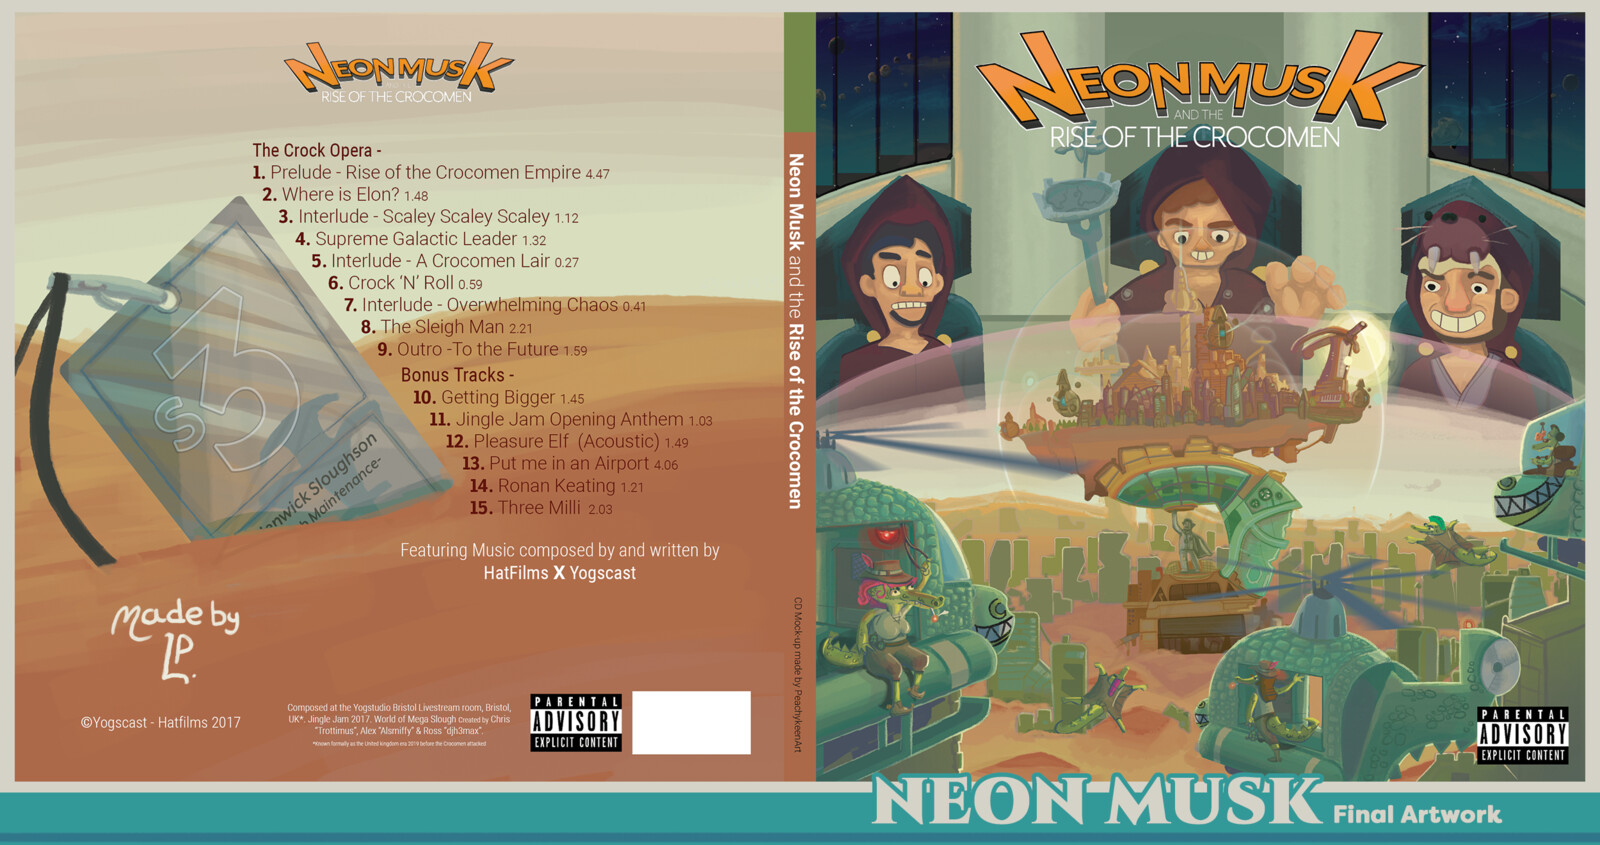 Fan Artwork | Neon Musk: and the Rise of the Crocomen AlbumArt